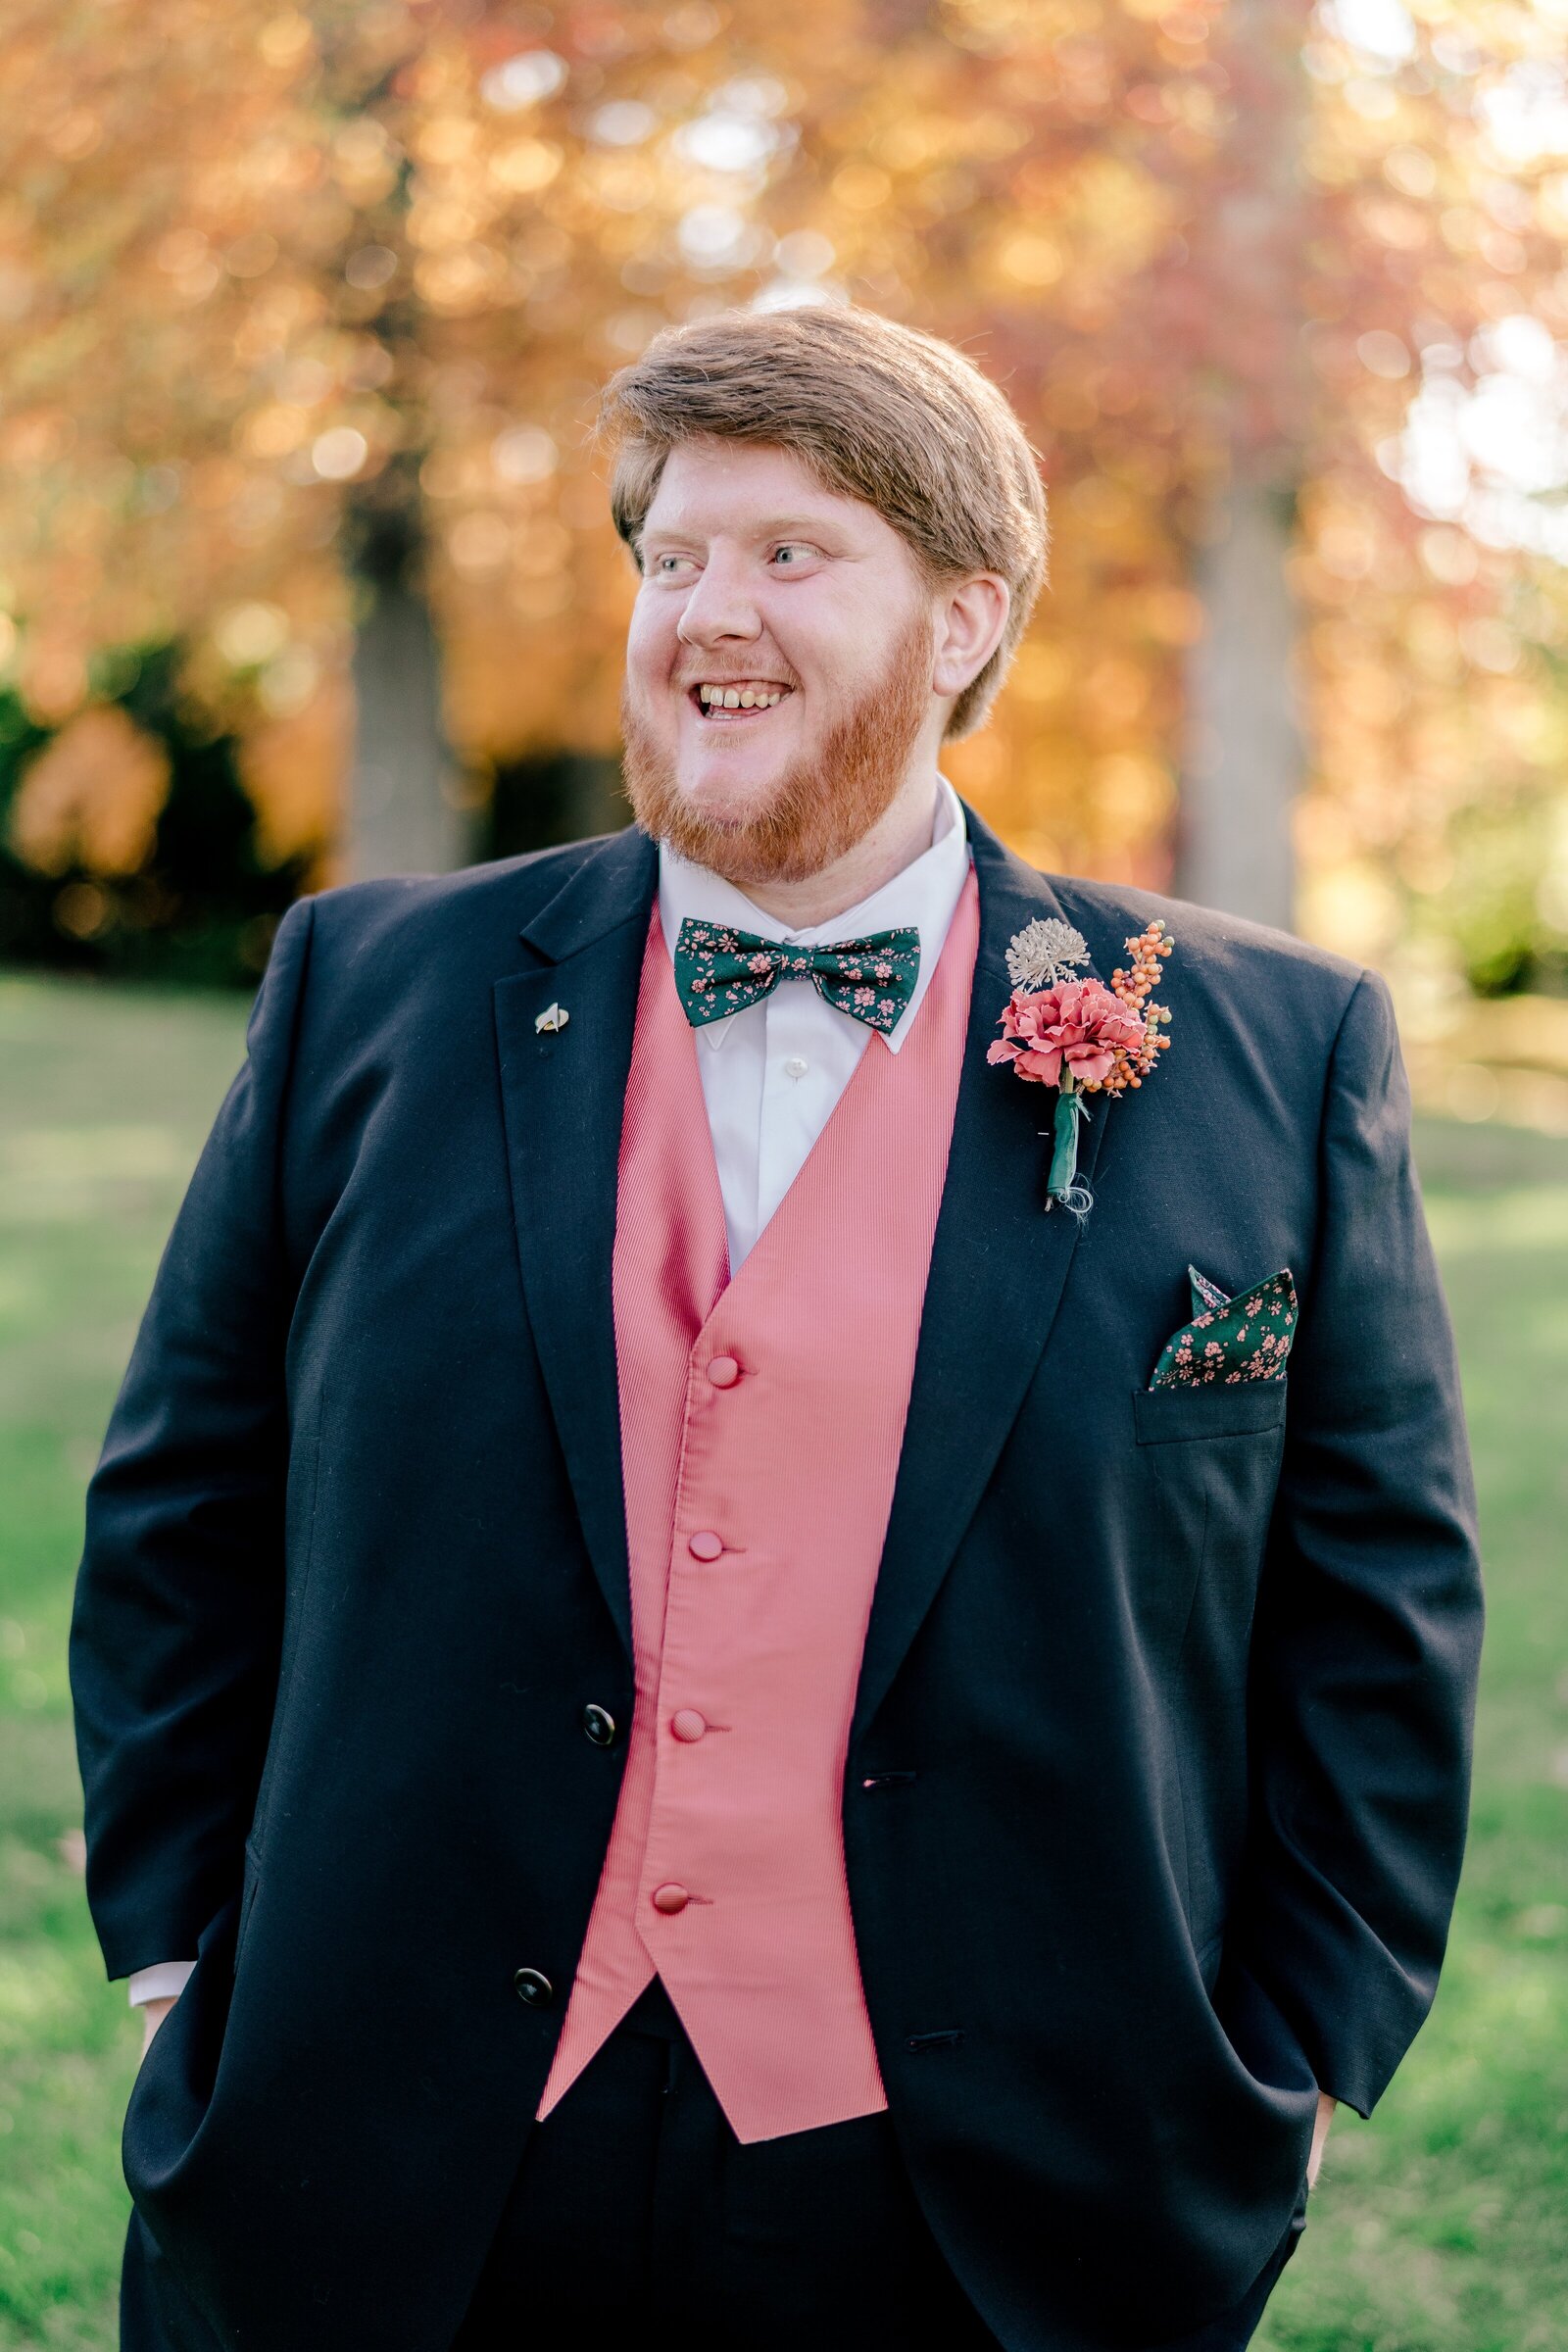 A groom laughs as he poses for a portrait before his wedding in Northern Virginia